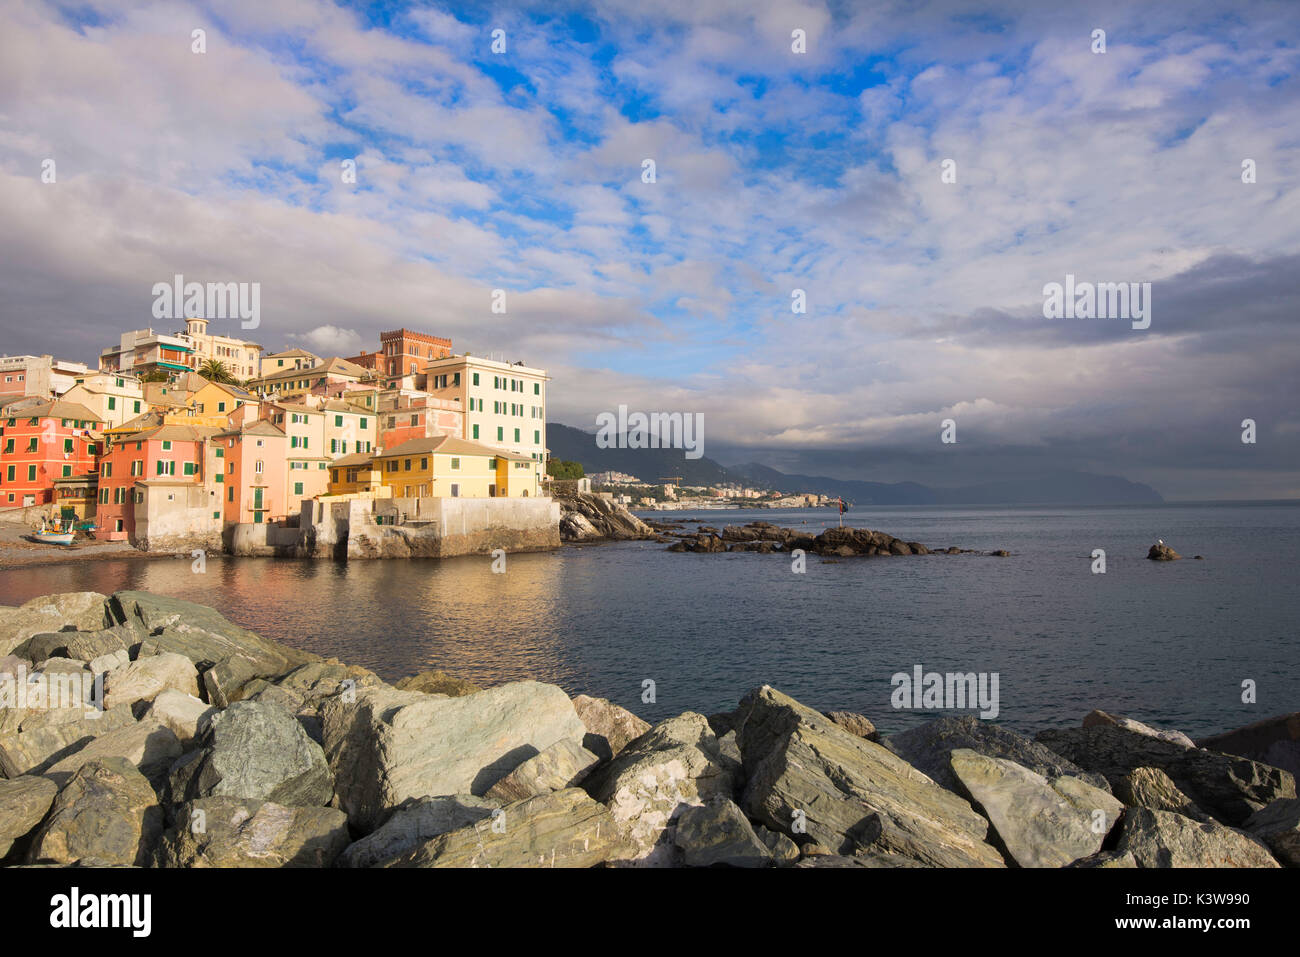 View of Boccadasse, Genoa, in a beautiful day. This part of the city is very beautiful, old and trip destination for foreigners. Stock Photo